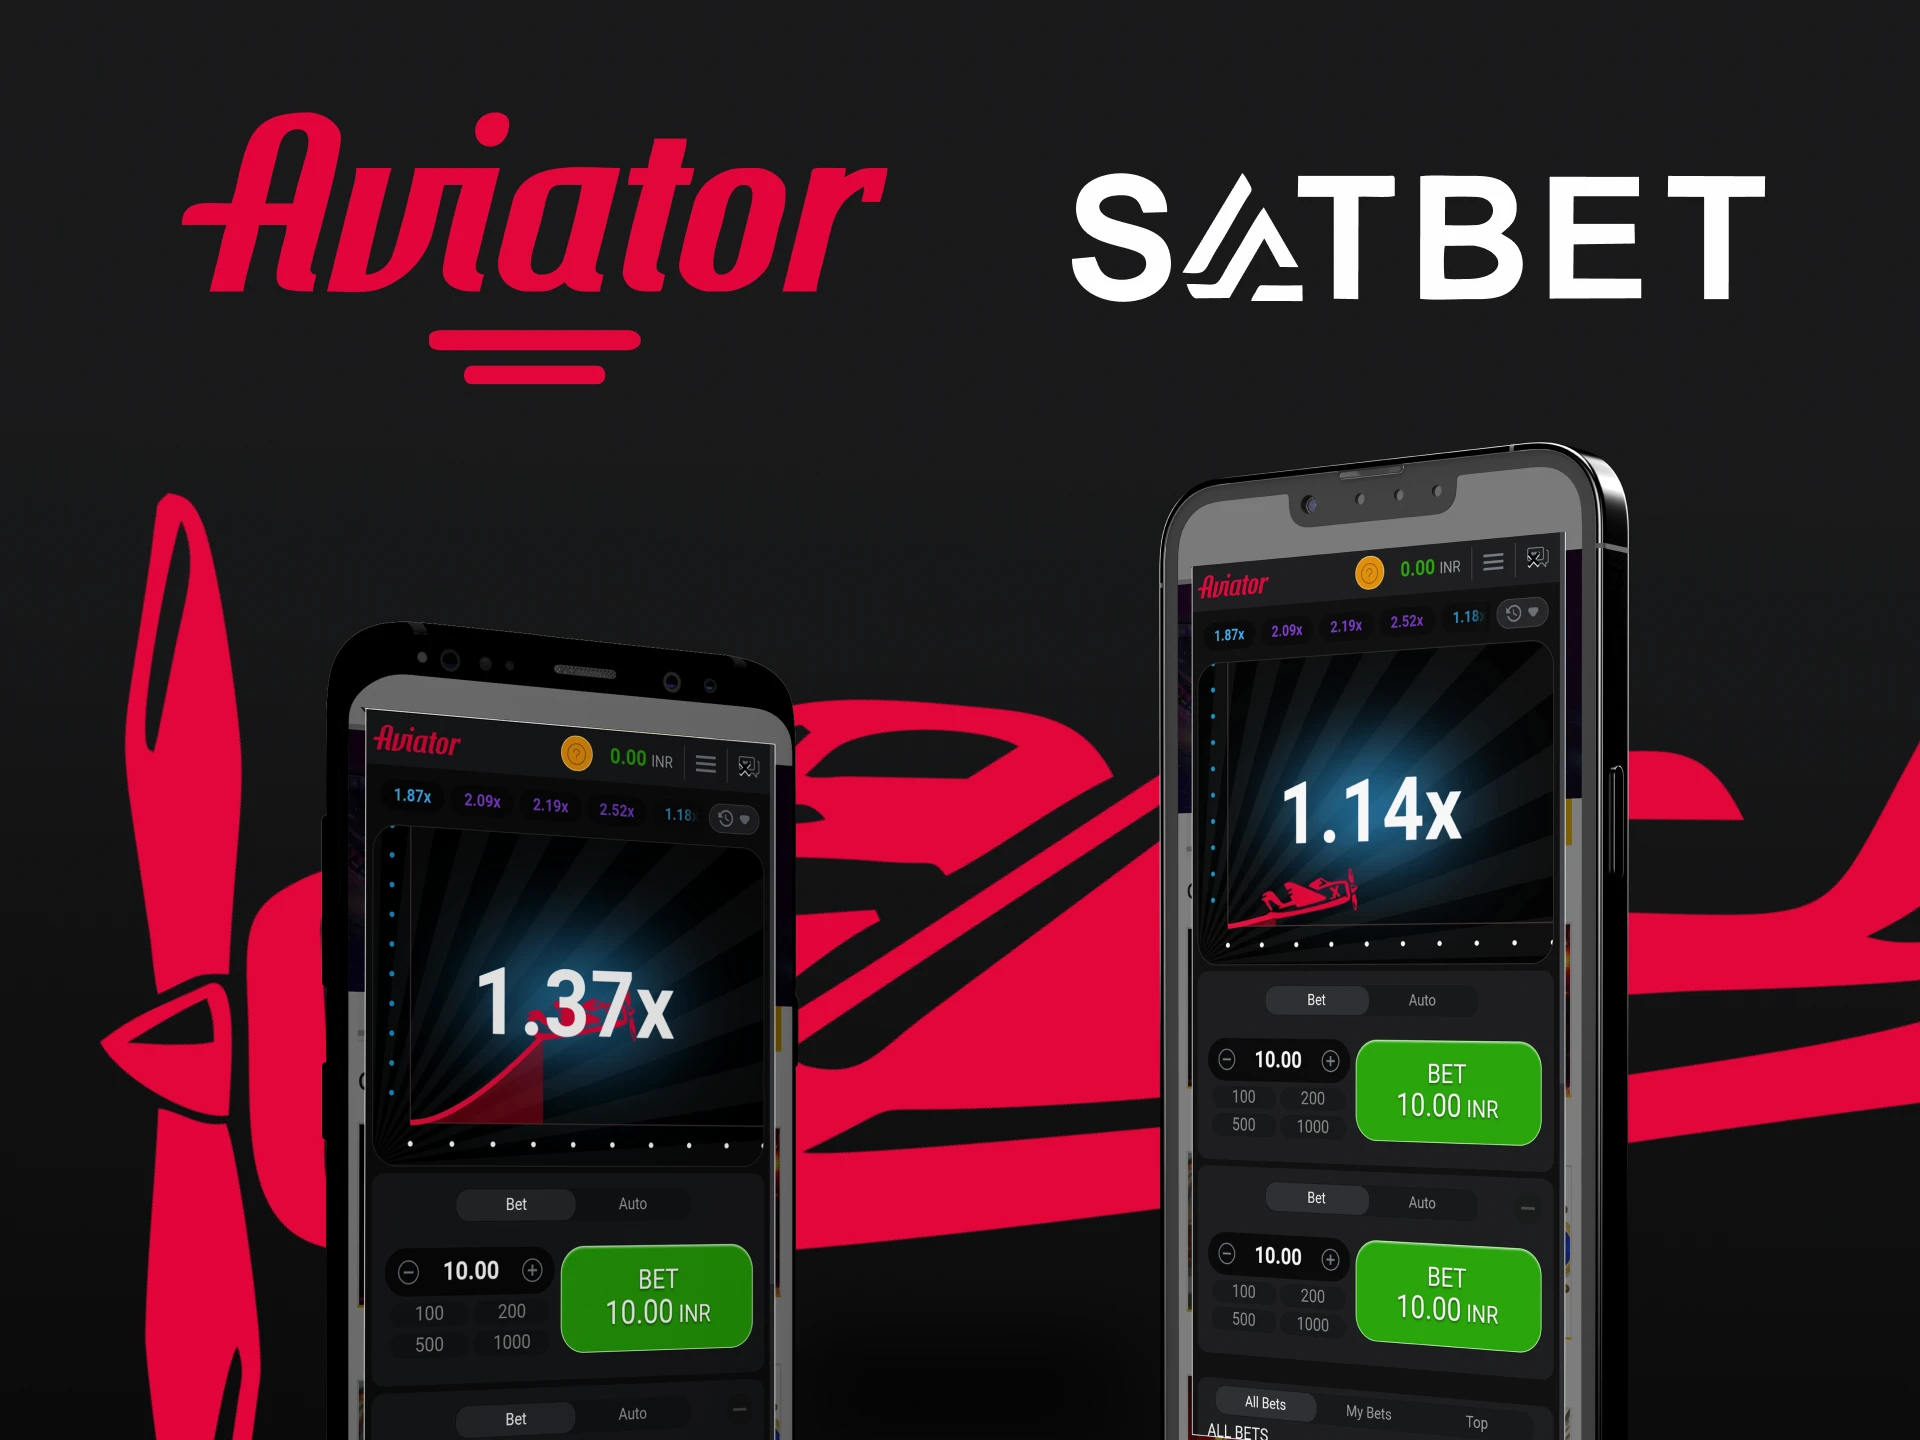 Choose your option to play Aviator on Satbet.